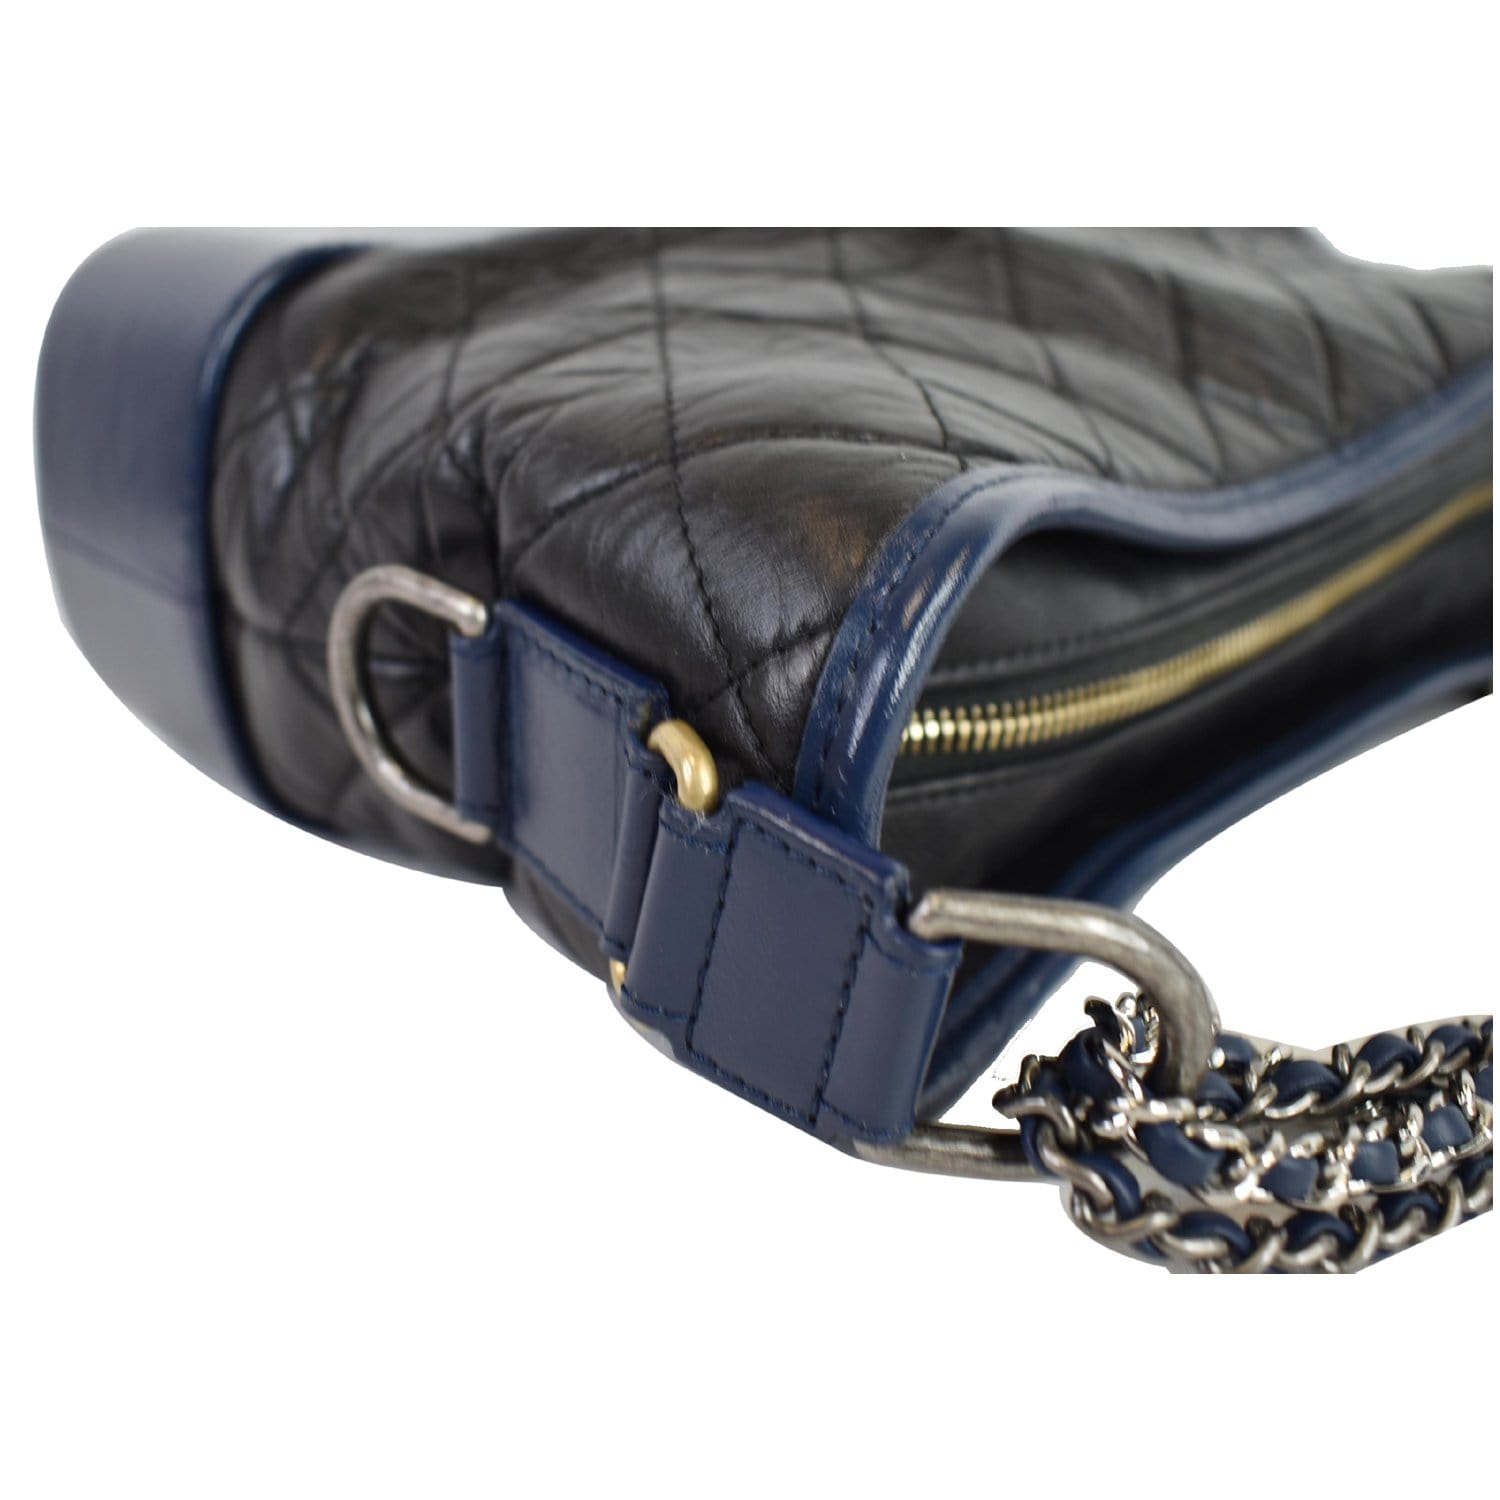 Gabrielle Quilted Hobo Bag